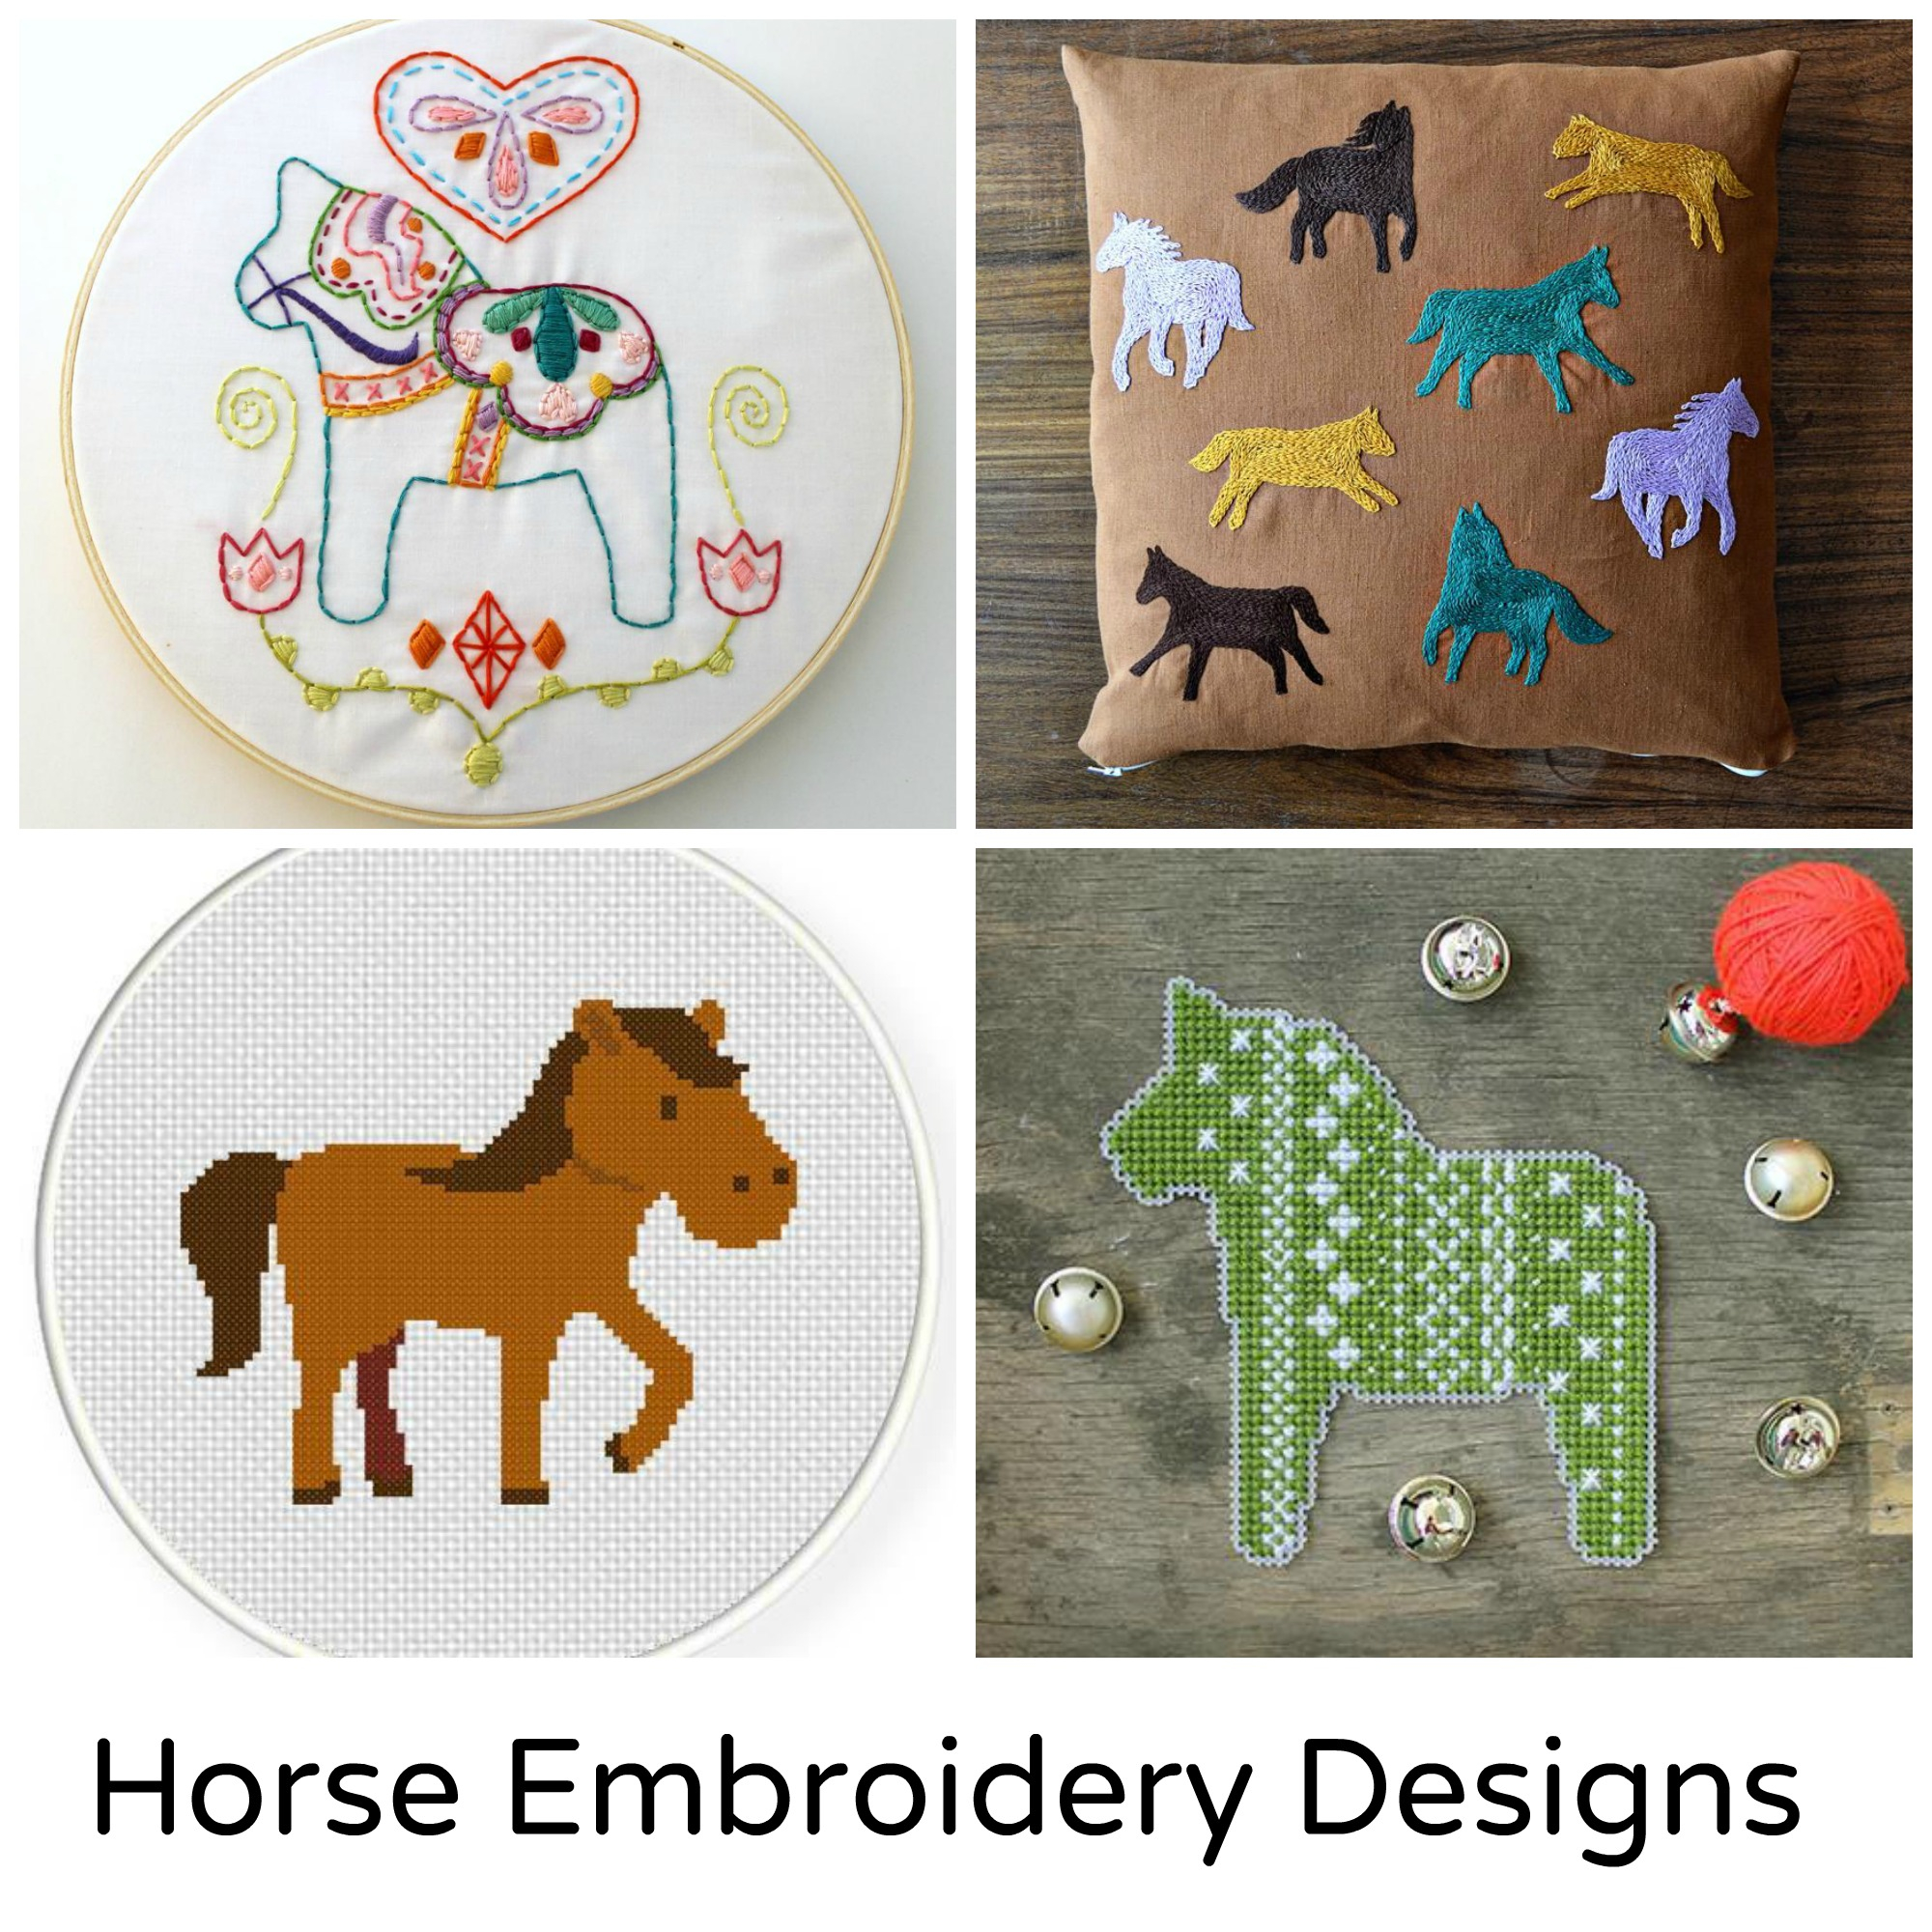 Horse Embroidery Patterns 10 Horse Embroidery Designs Youll Love